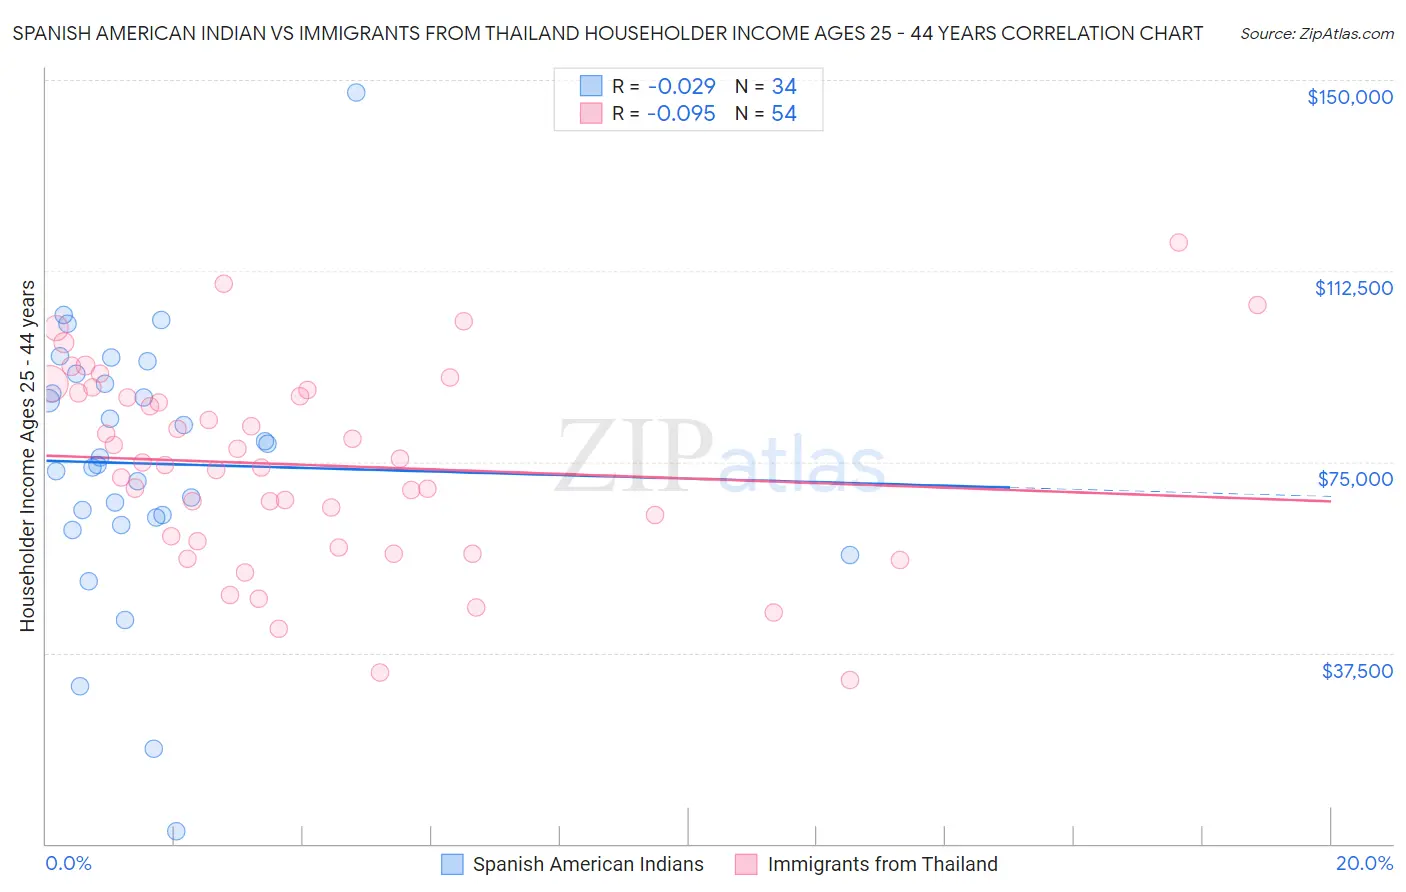 Spanish American Indian vs Immigrants from Thailand Householder Income Ages 25 - 44 years